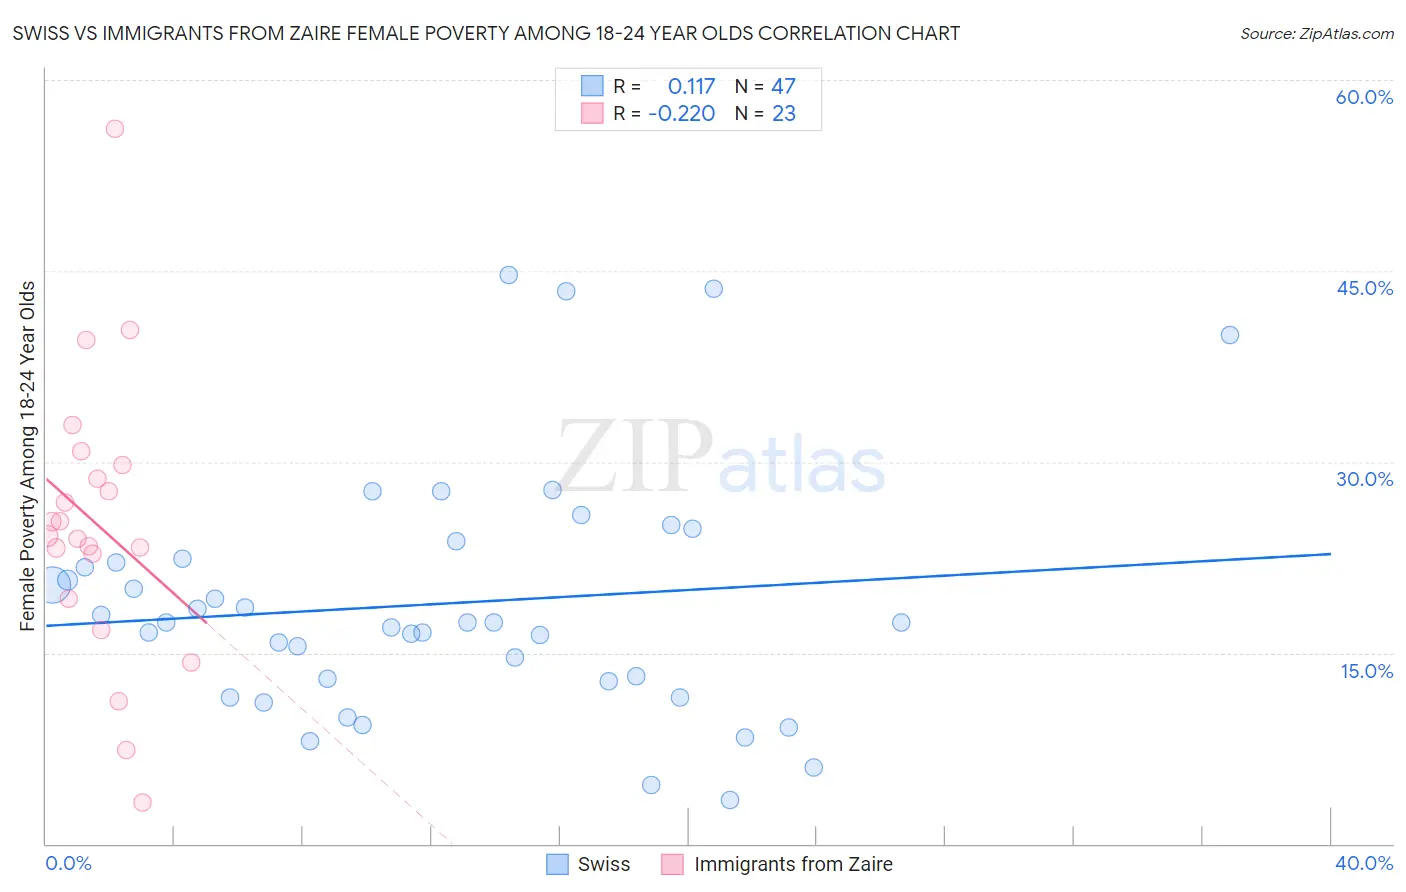 Swiss vs Immigrants from Zaire Female Poverty Among 18-24 Year Olds